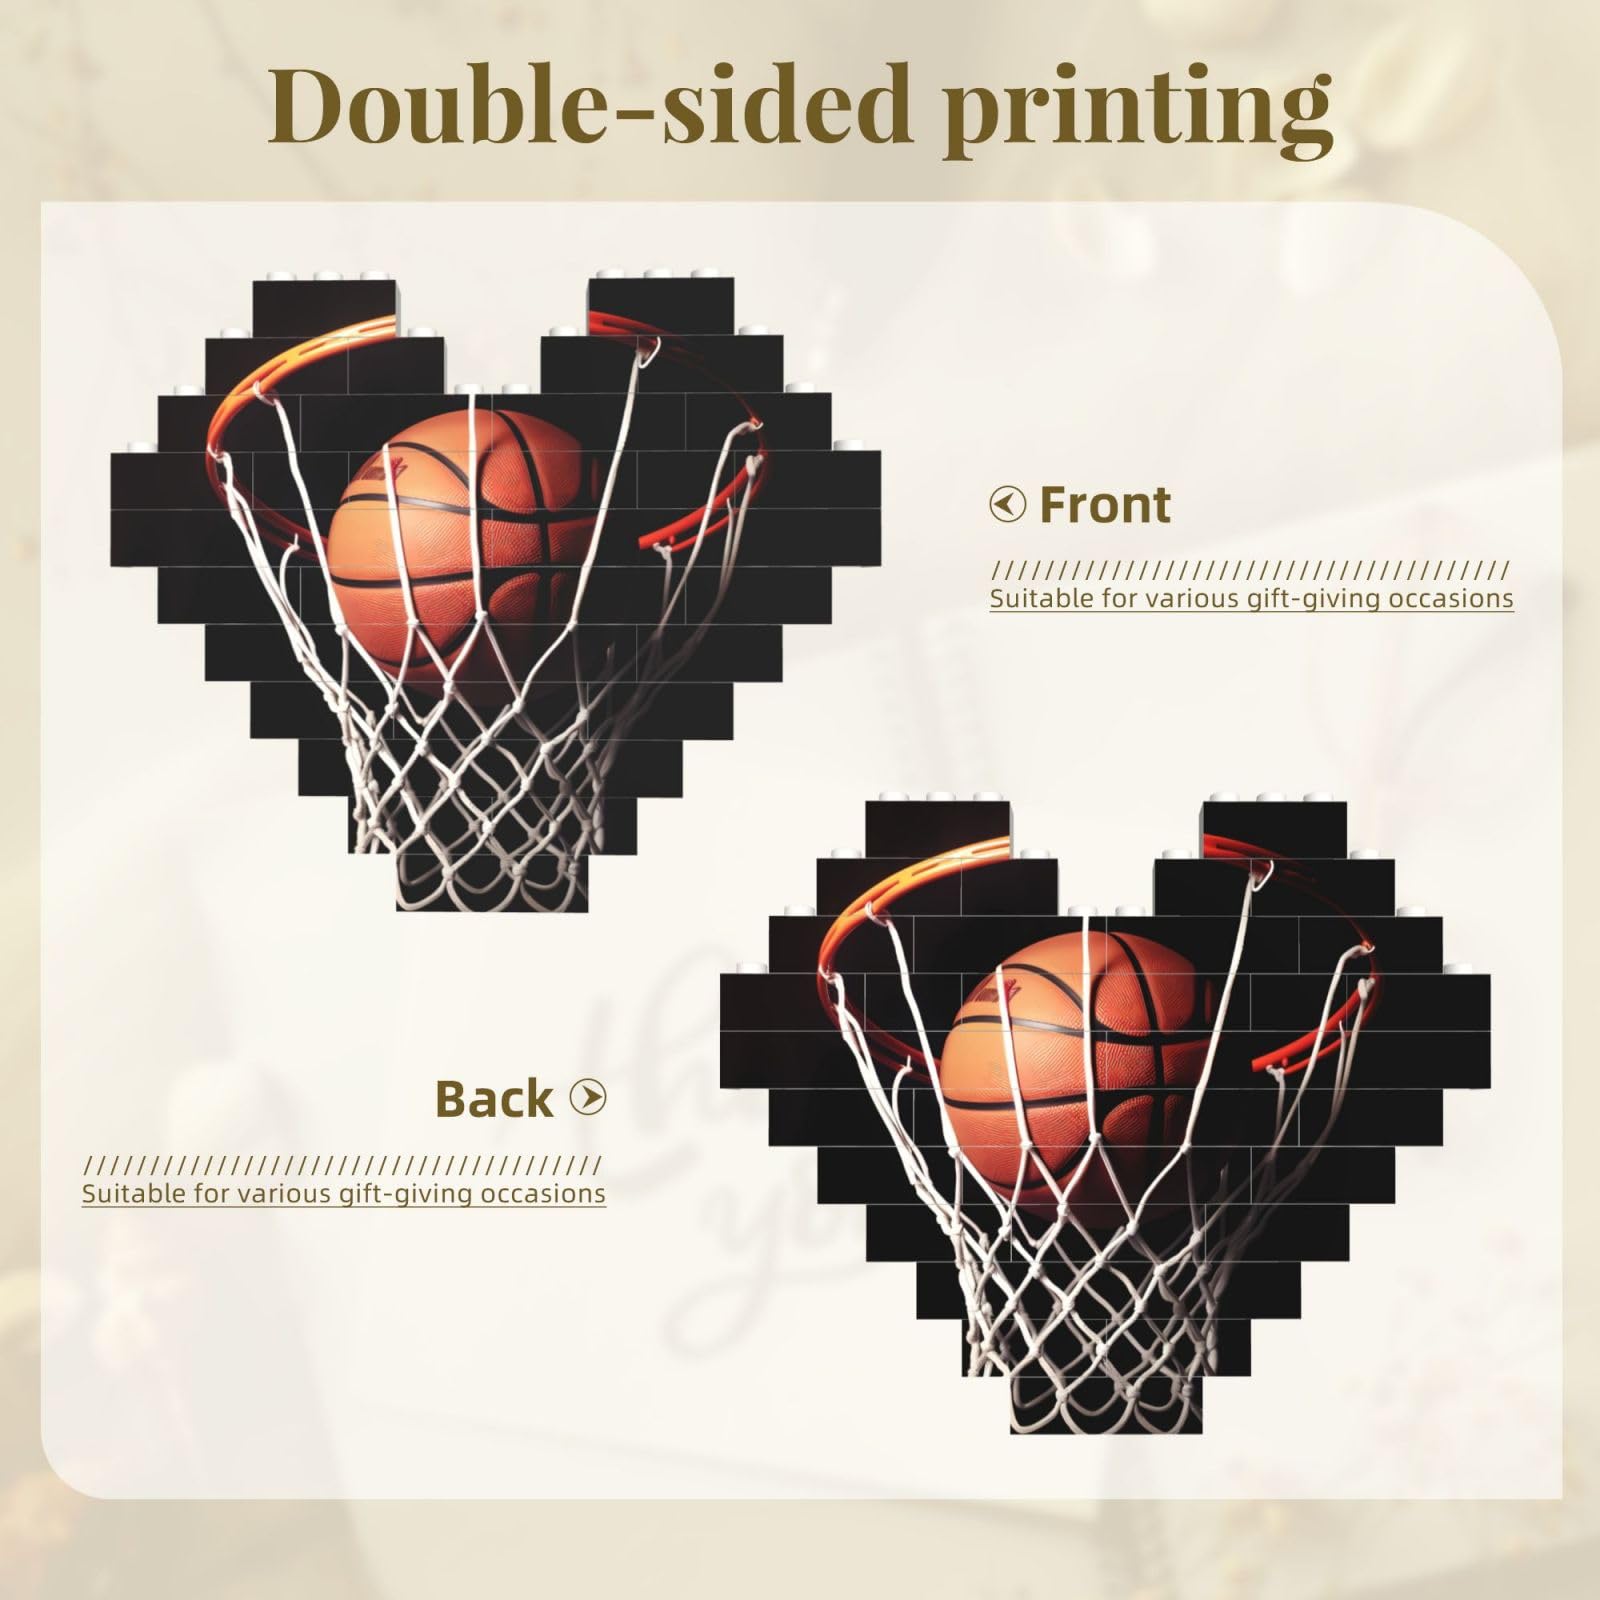 Building Block Puzzle Heart Shaped Building Bricks Basketball Puzzles Block Puzzle for Adults 3D Micro Building Blocks for Home Decor Bricks Set